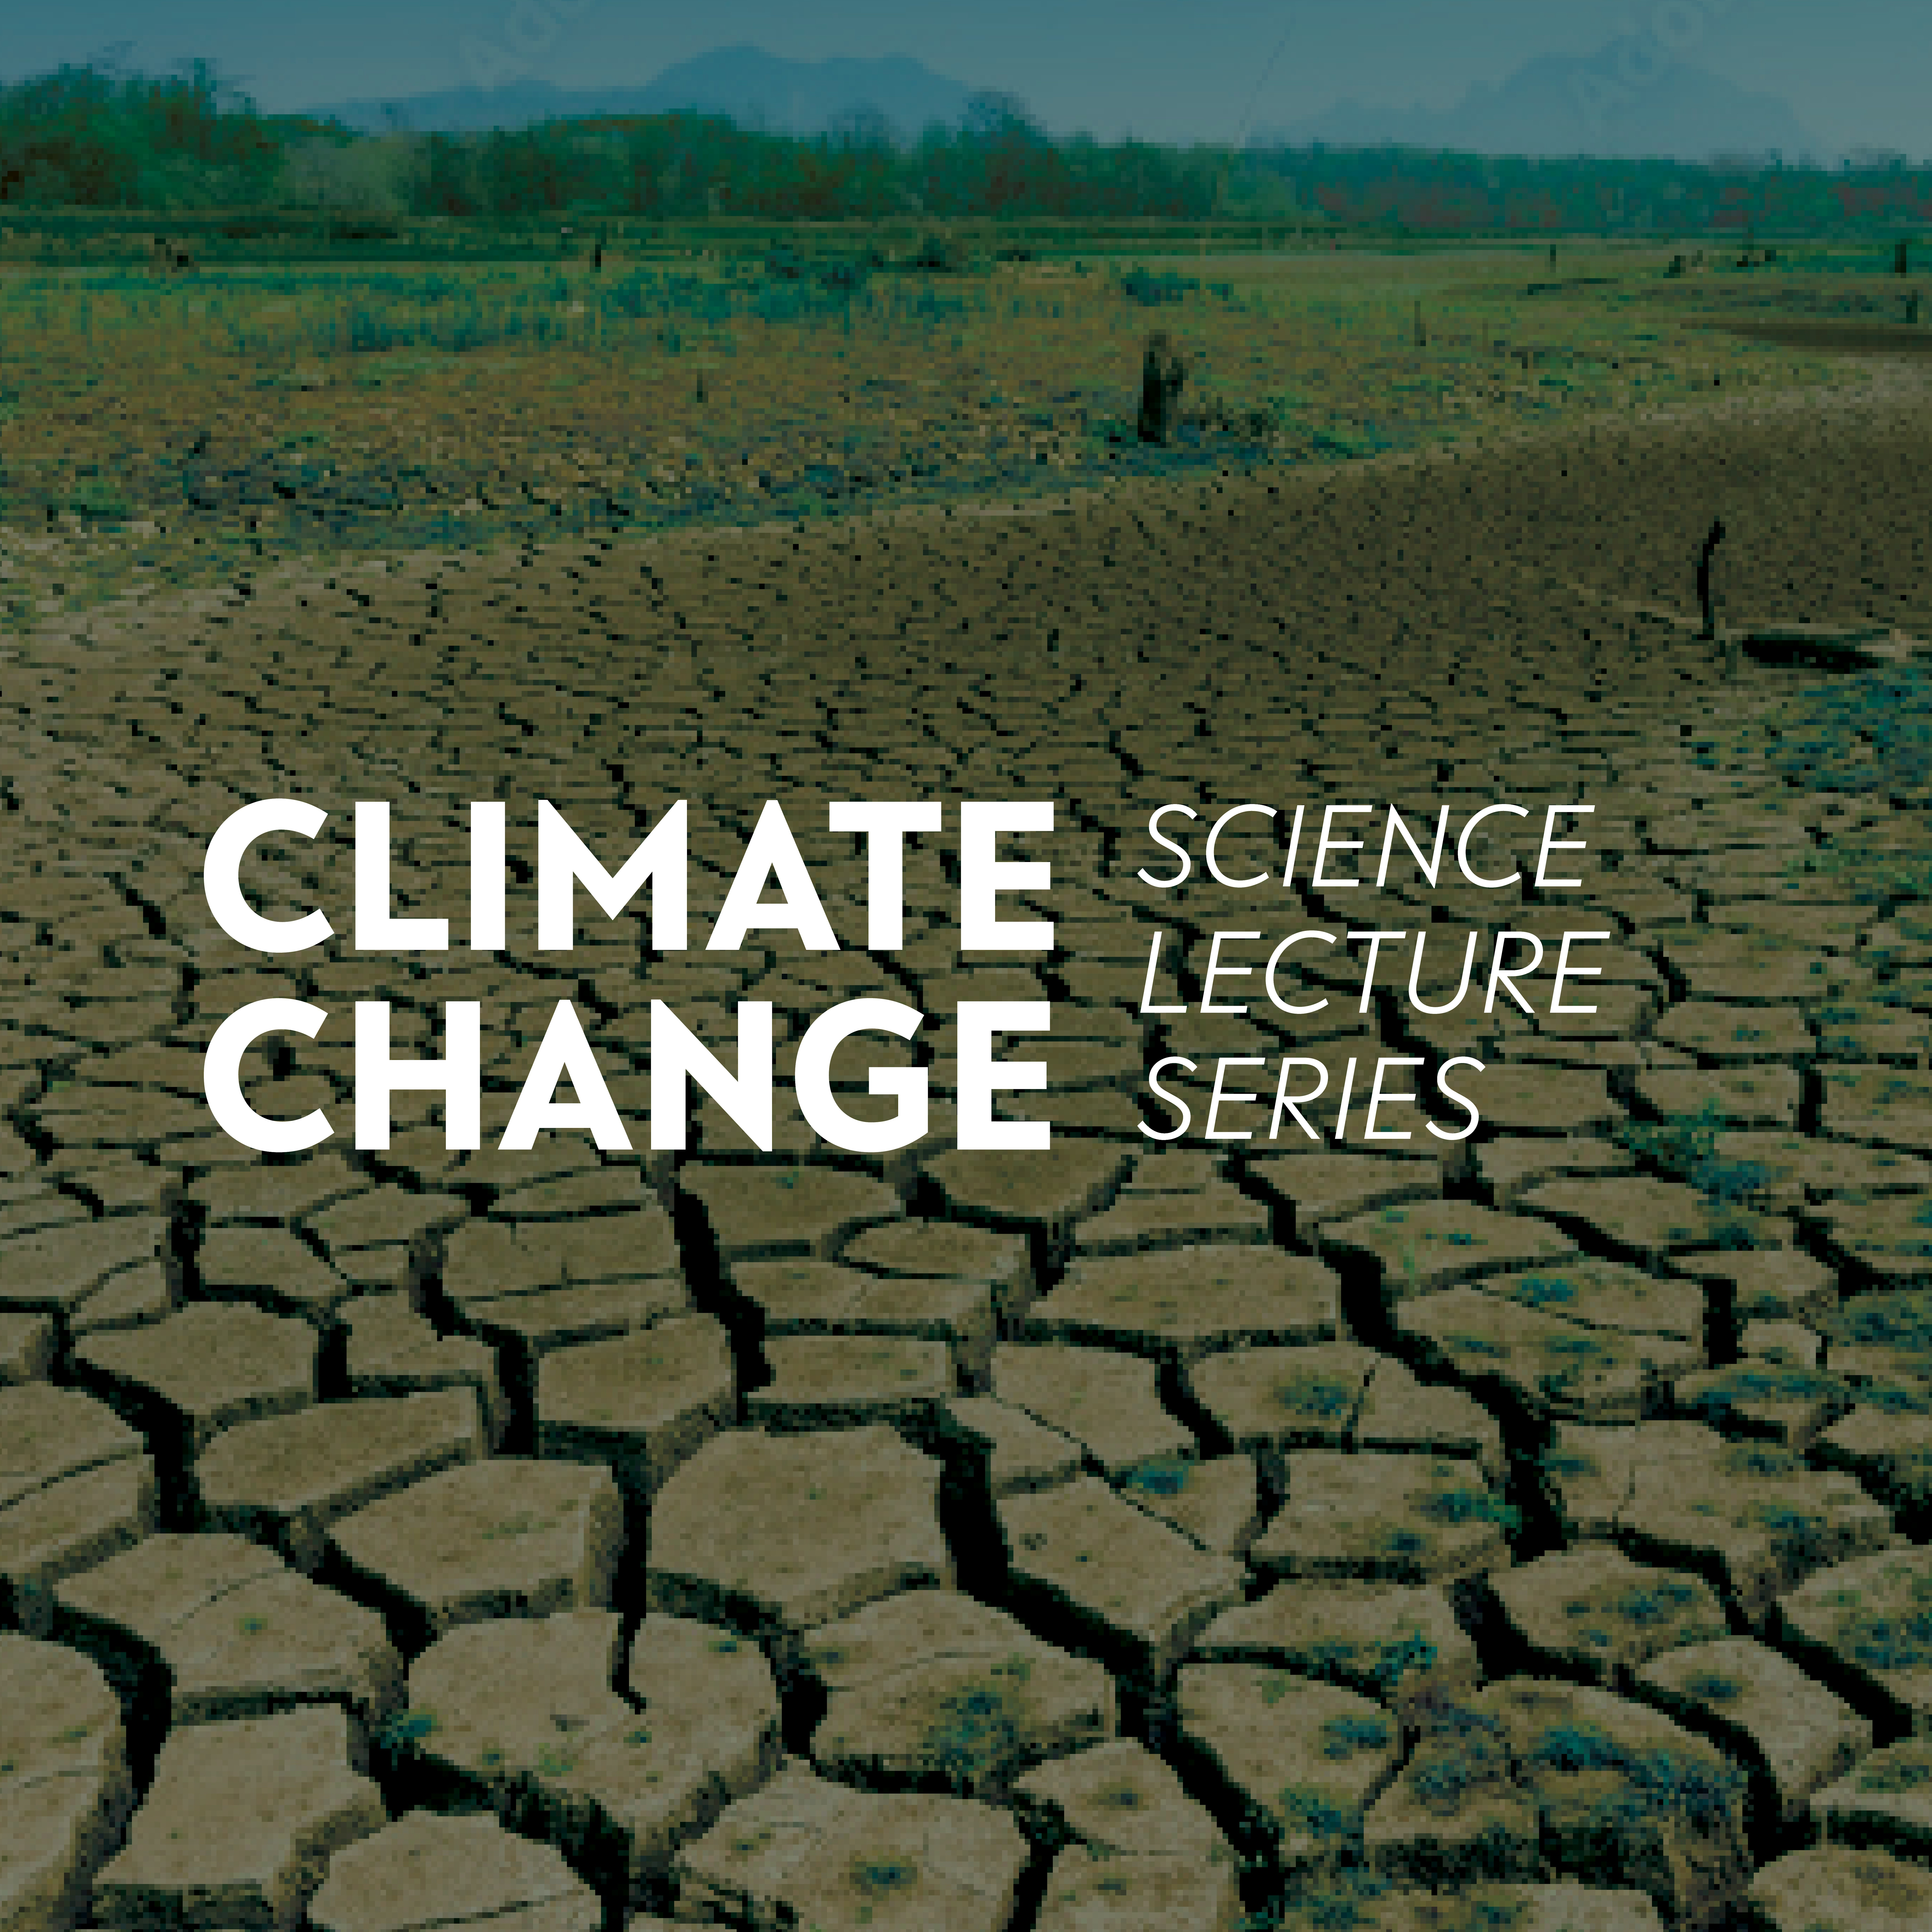 Image of dry cracked earth with text: Climate Change Science Lecture Series